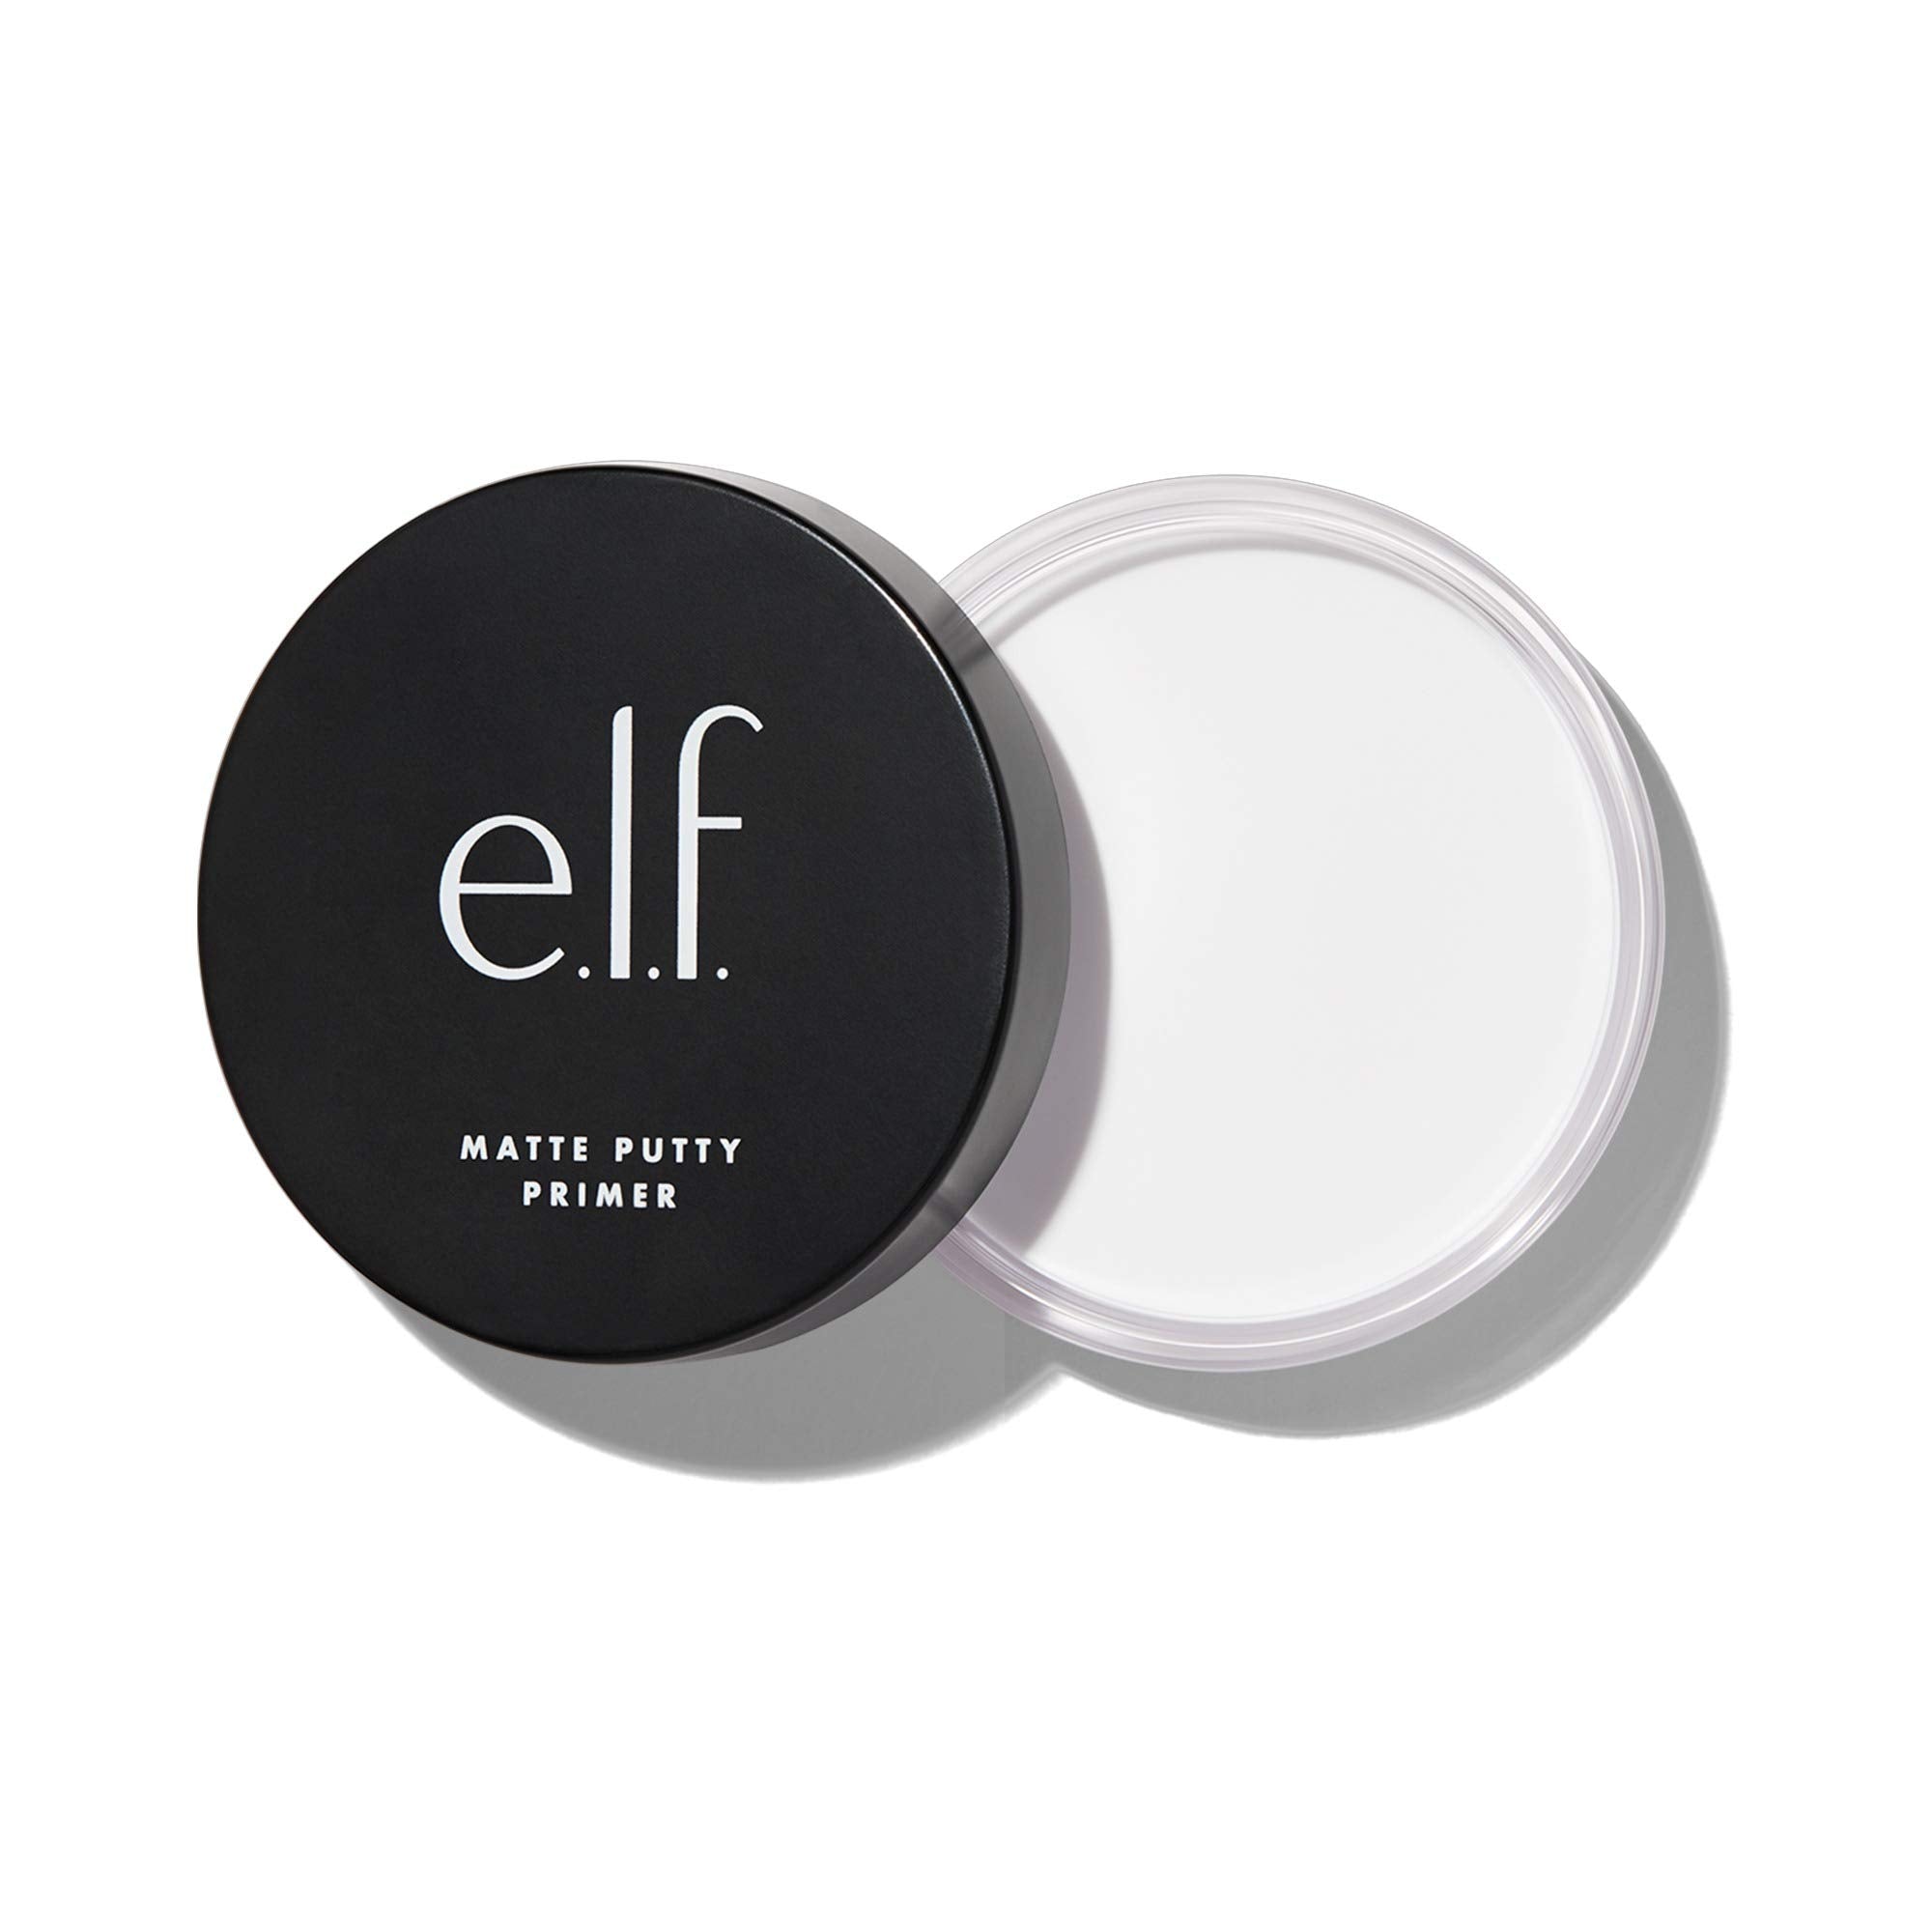 e.l.f, Matte Putty Primer, Skin Perfecting, Lightweight, Oil-free formula, Mattifies, Absorbs Excess Oil, Fills in Pores and Fine Lines, Soft, Matte Finish, All-Day Wear, 21g